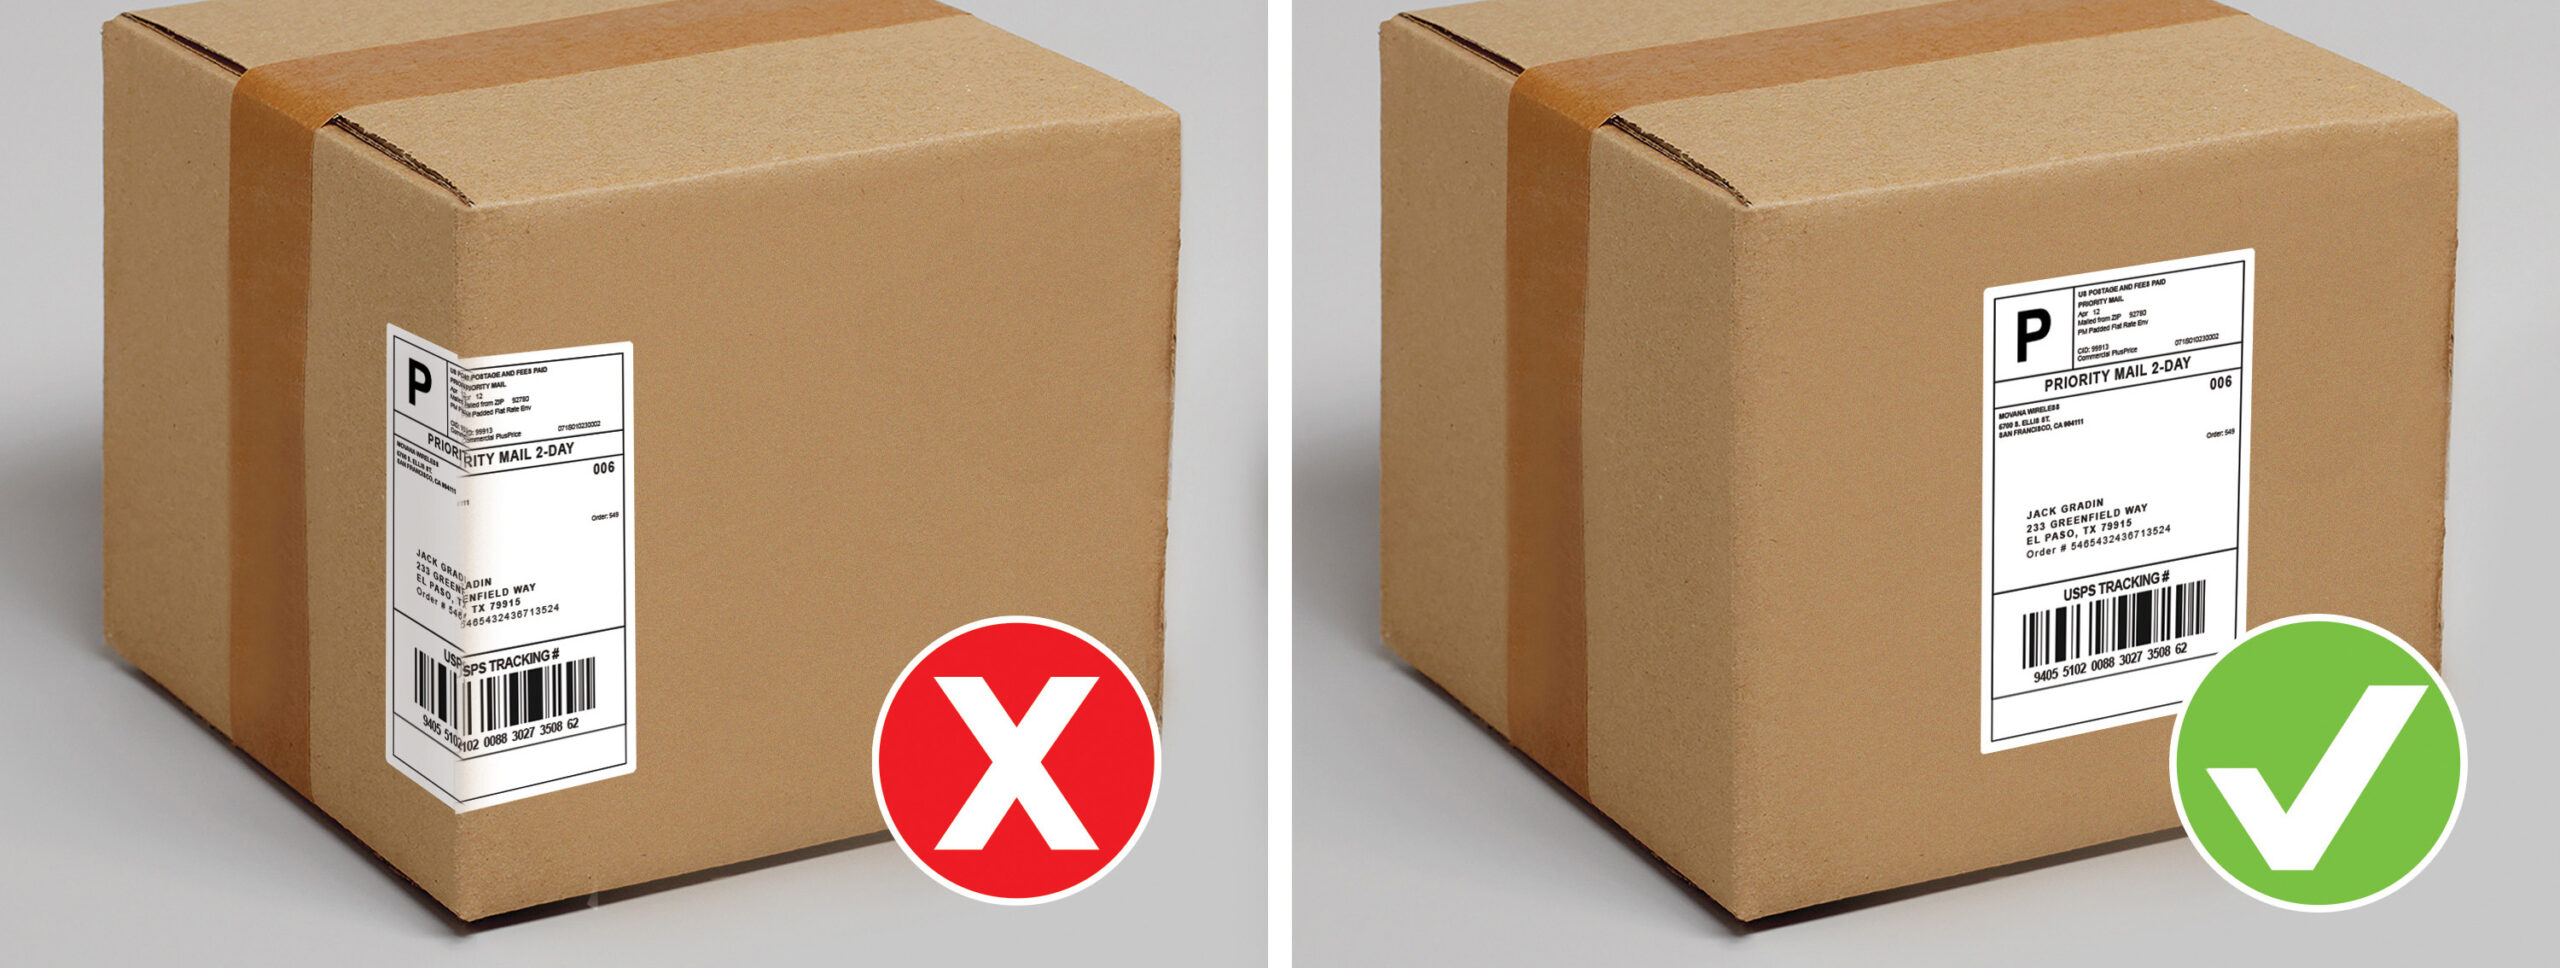 E-Commerce Shipping & Packaging BLOG – Tagged Dymo Labels